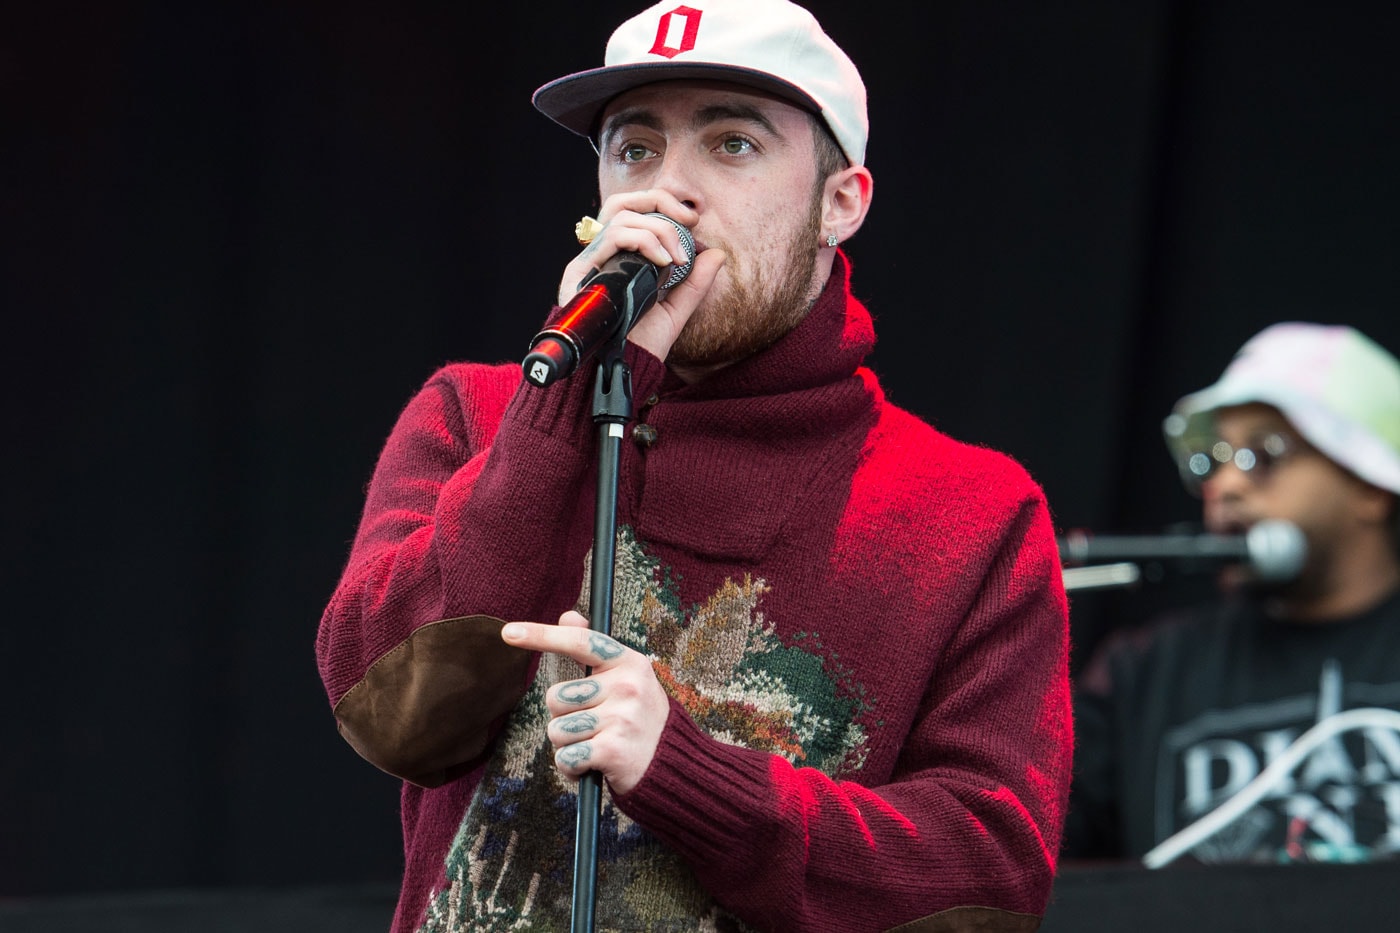 Mac Miller Death Dead 7 Albums Billboard 200 Charts Swimming Best Day Ever GO:OD AM Blue Side Park The Divine Feminine Watching Movies With the Sounds Off Macaelic No. 6 26 32 49 50 59 106 Seven Music Watch Listen Stream